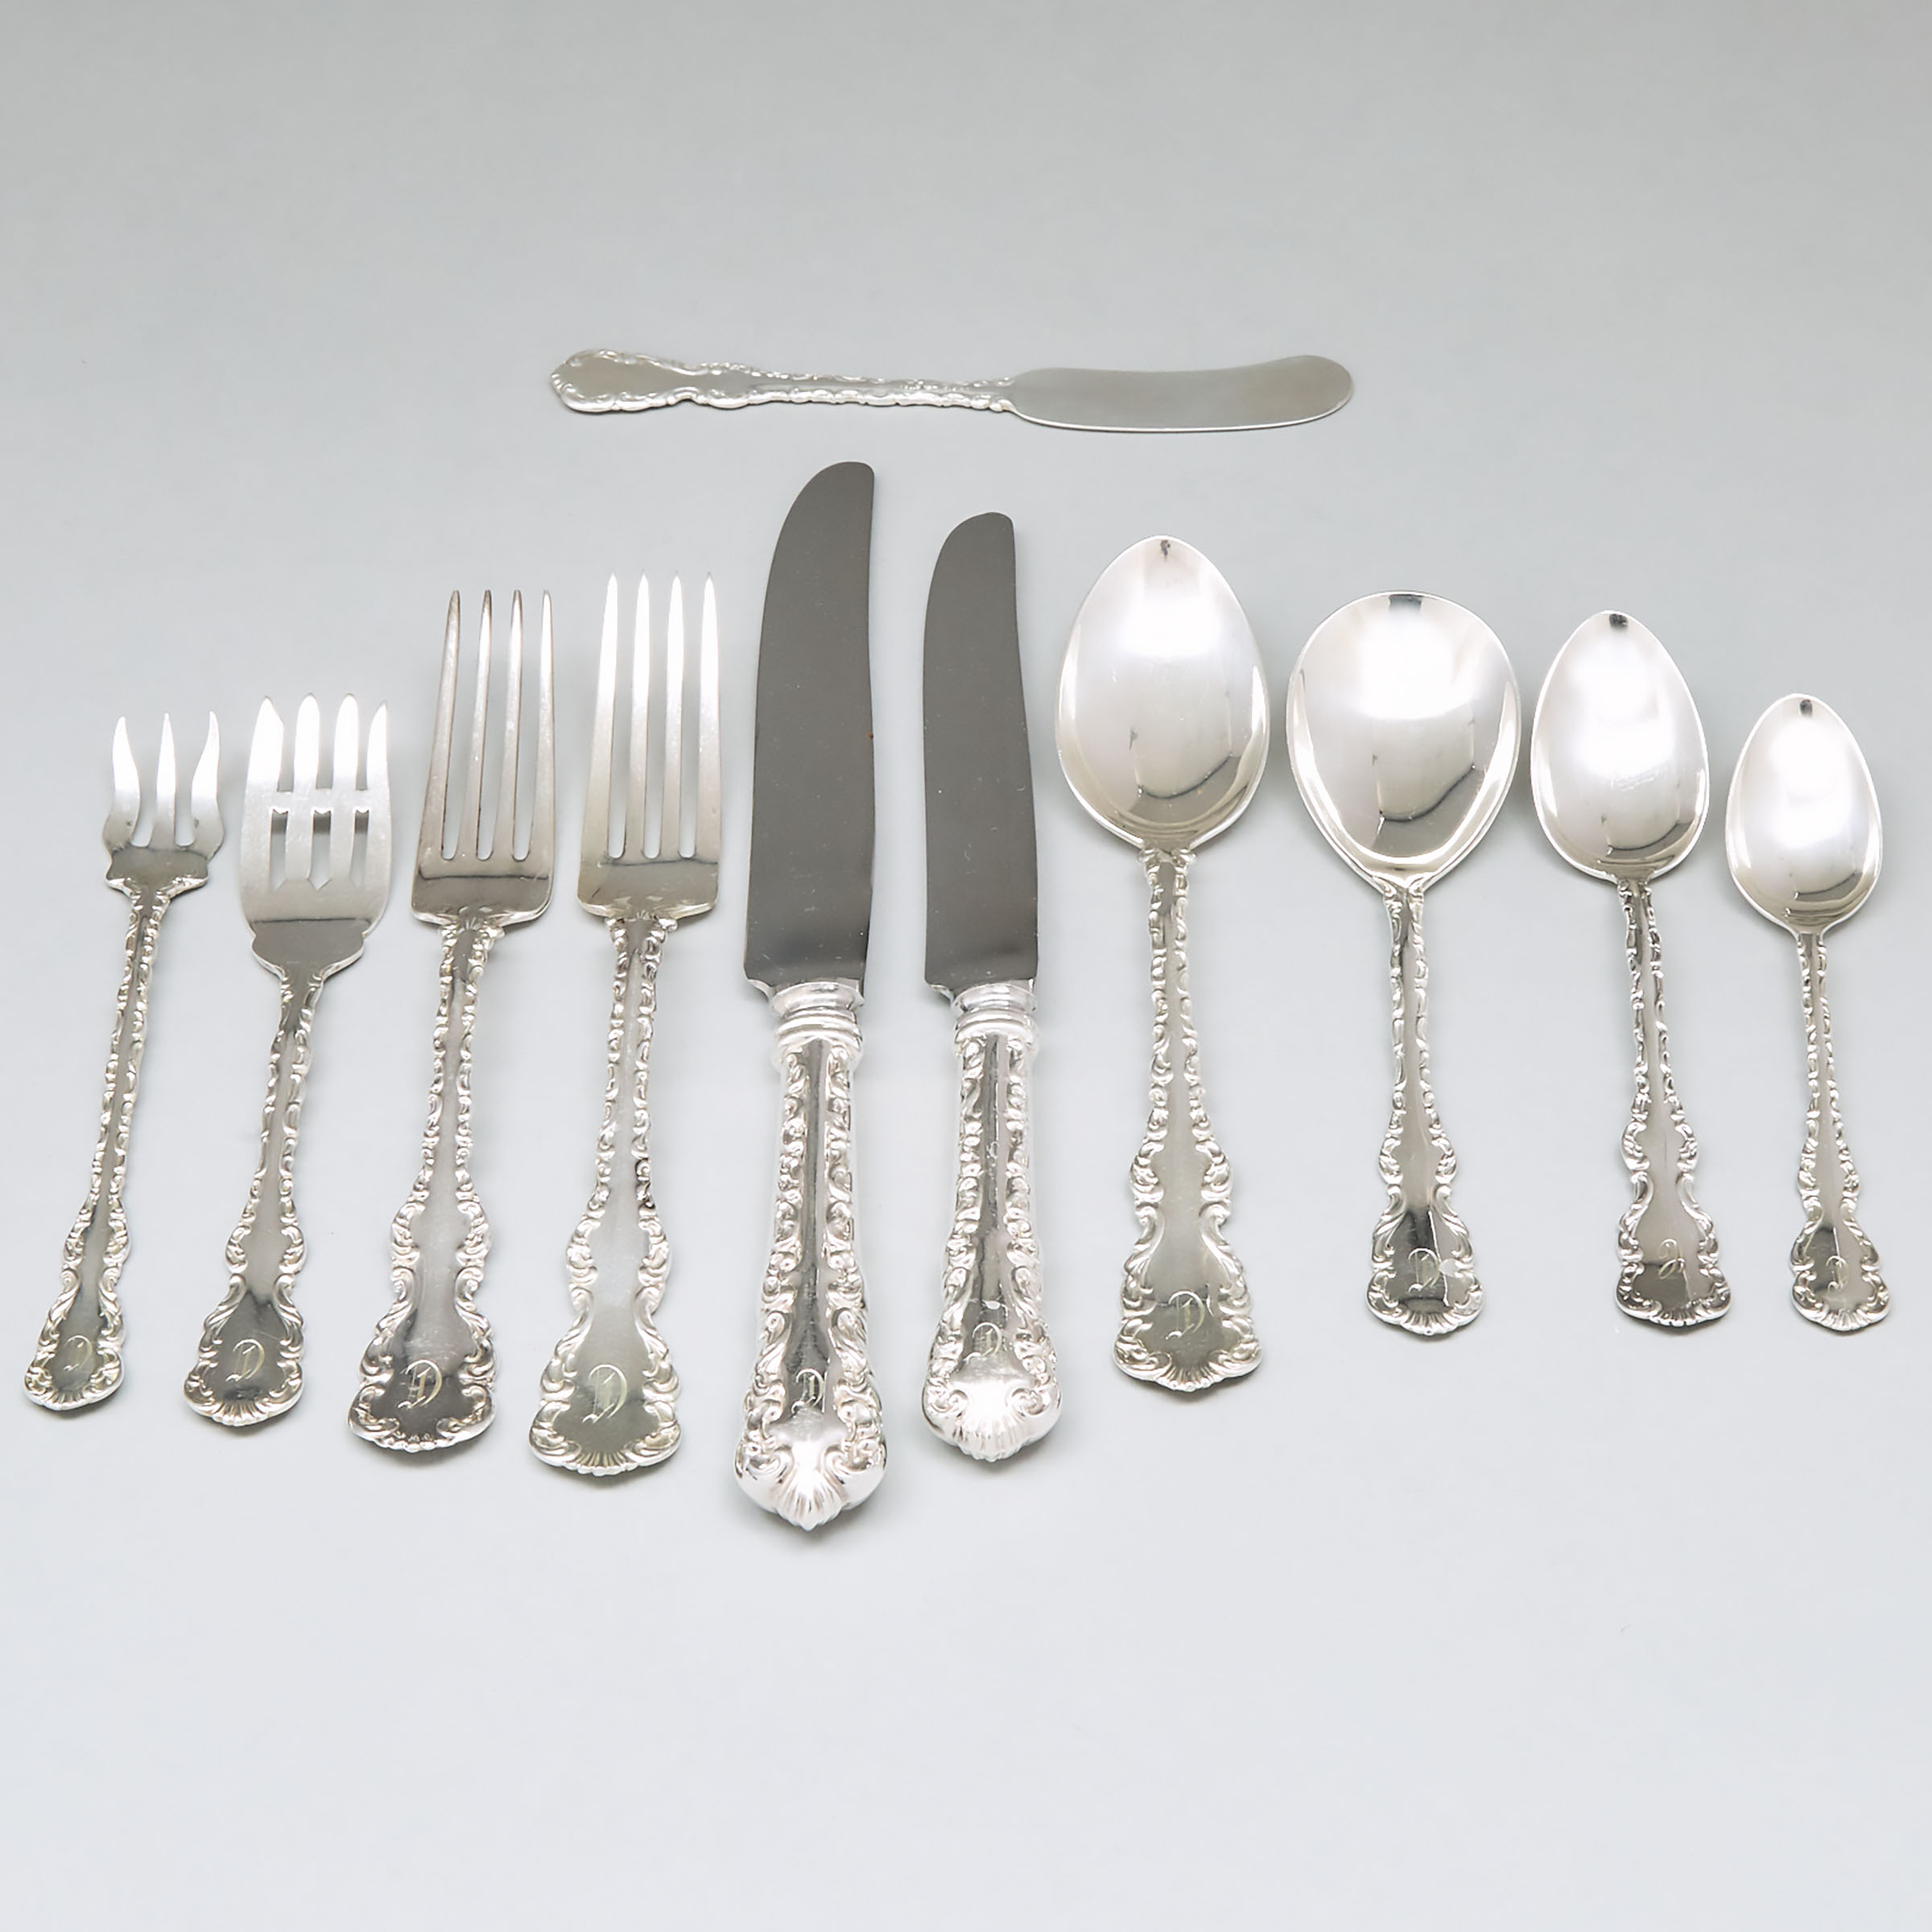 Canadian Silver 'Louis XV' Pattern Flatware Service, Henry Birks & Sons, Montreal, Que., 20th century